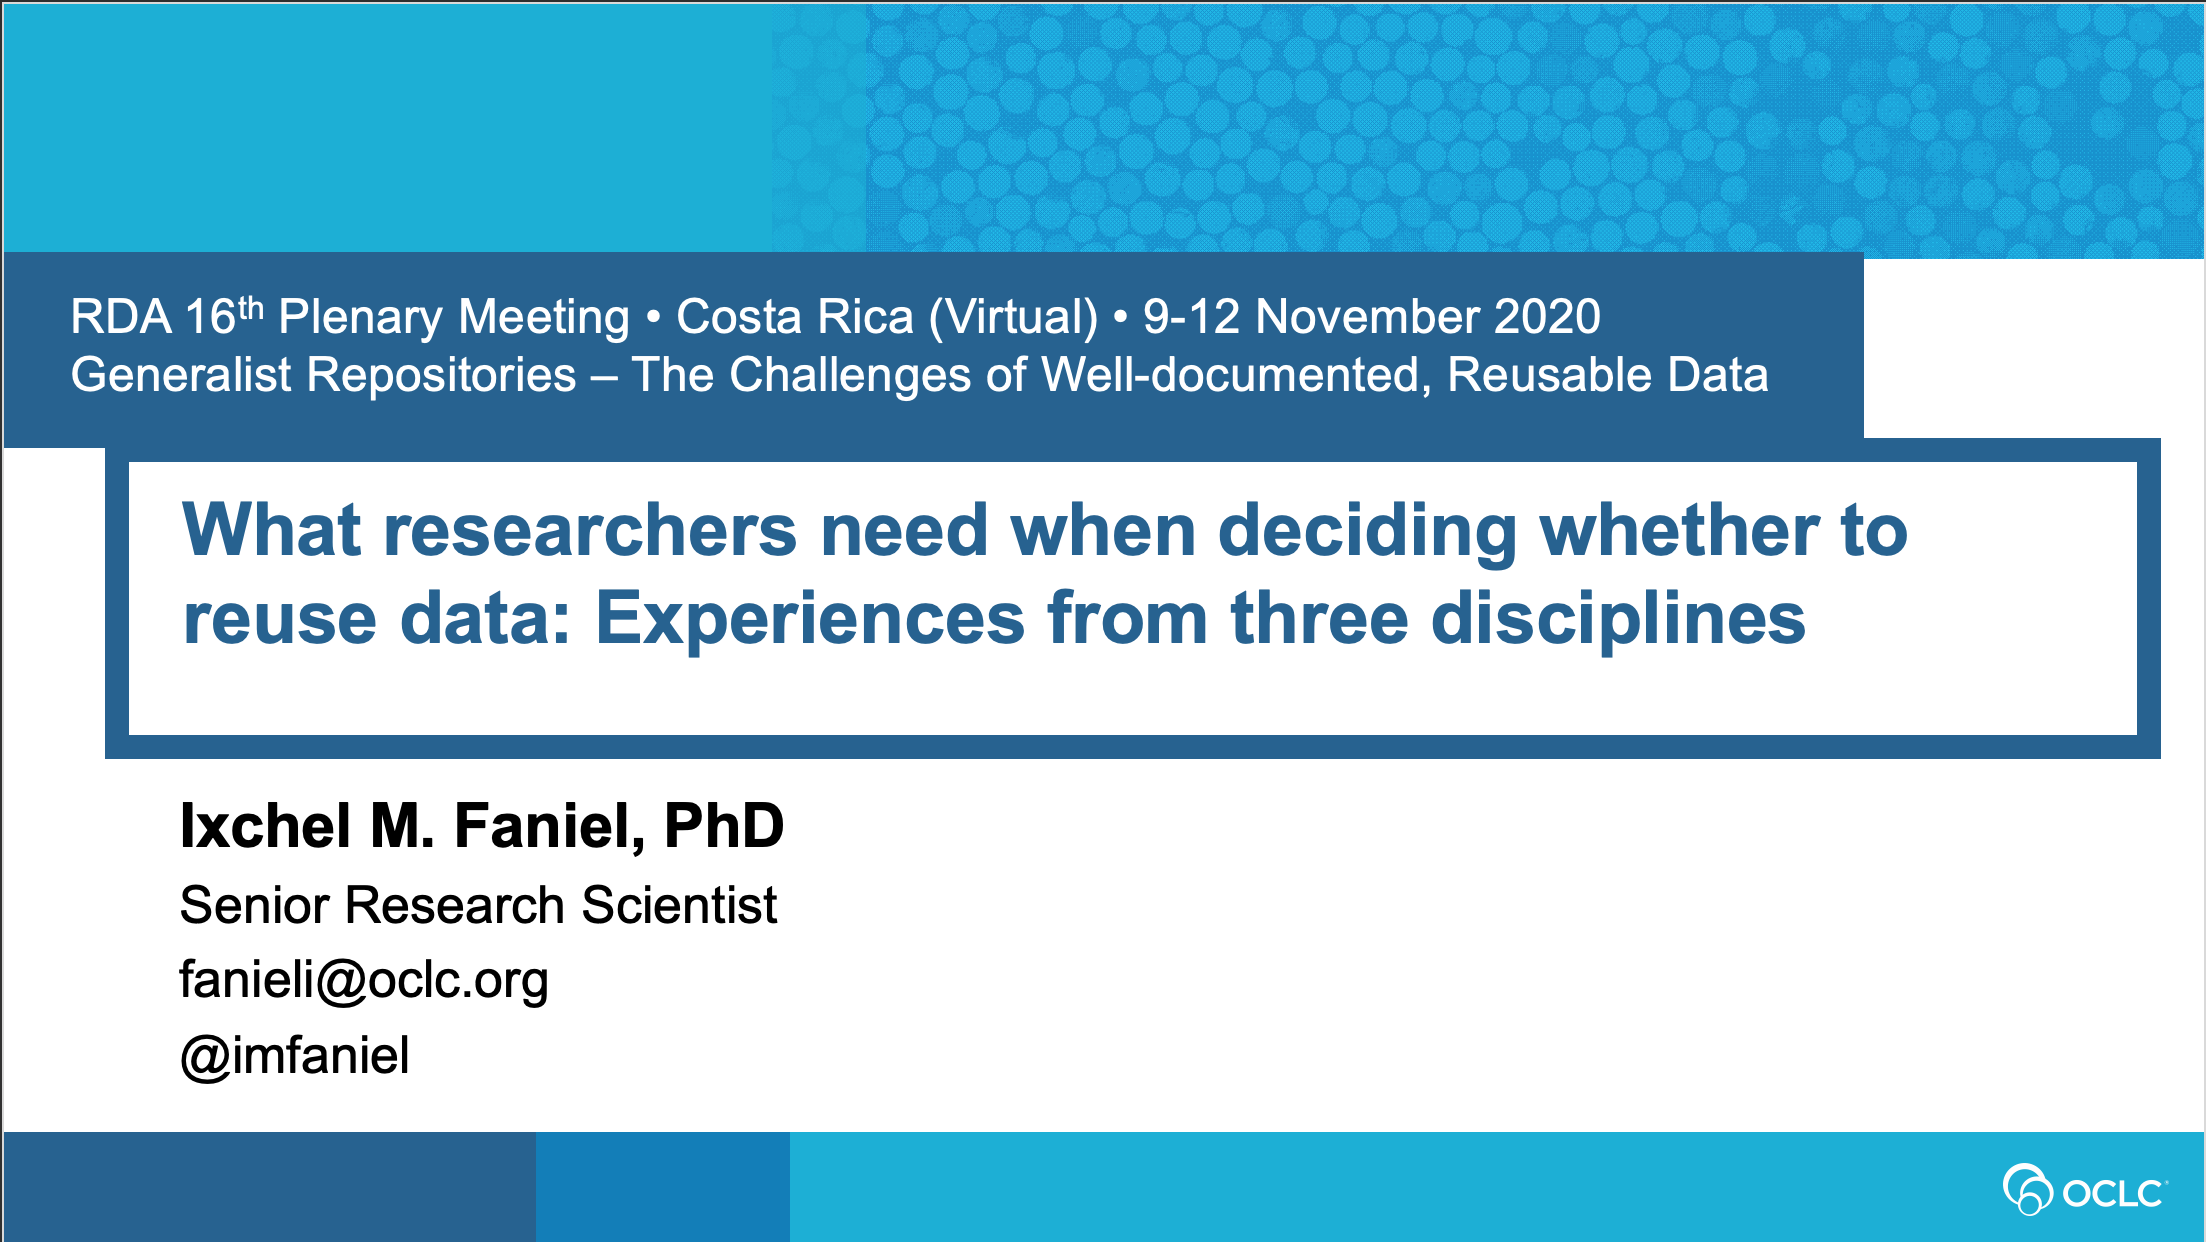 What researchers need when deciding whether to reuse data: Experiences from three disciplines